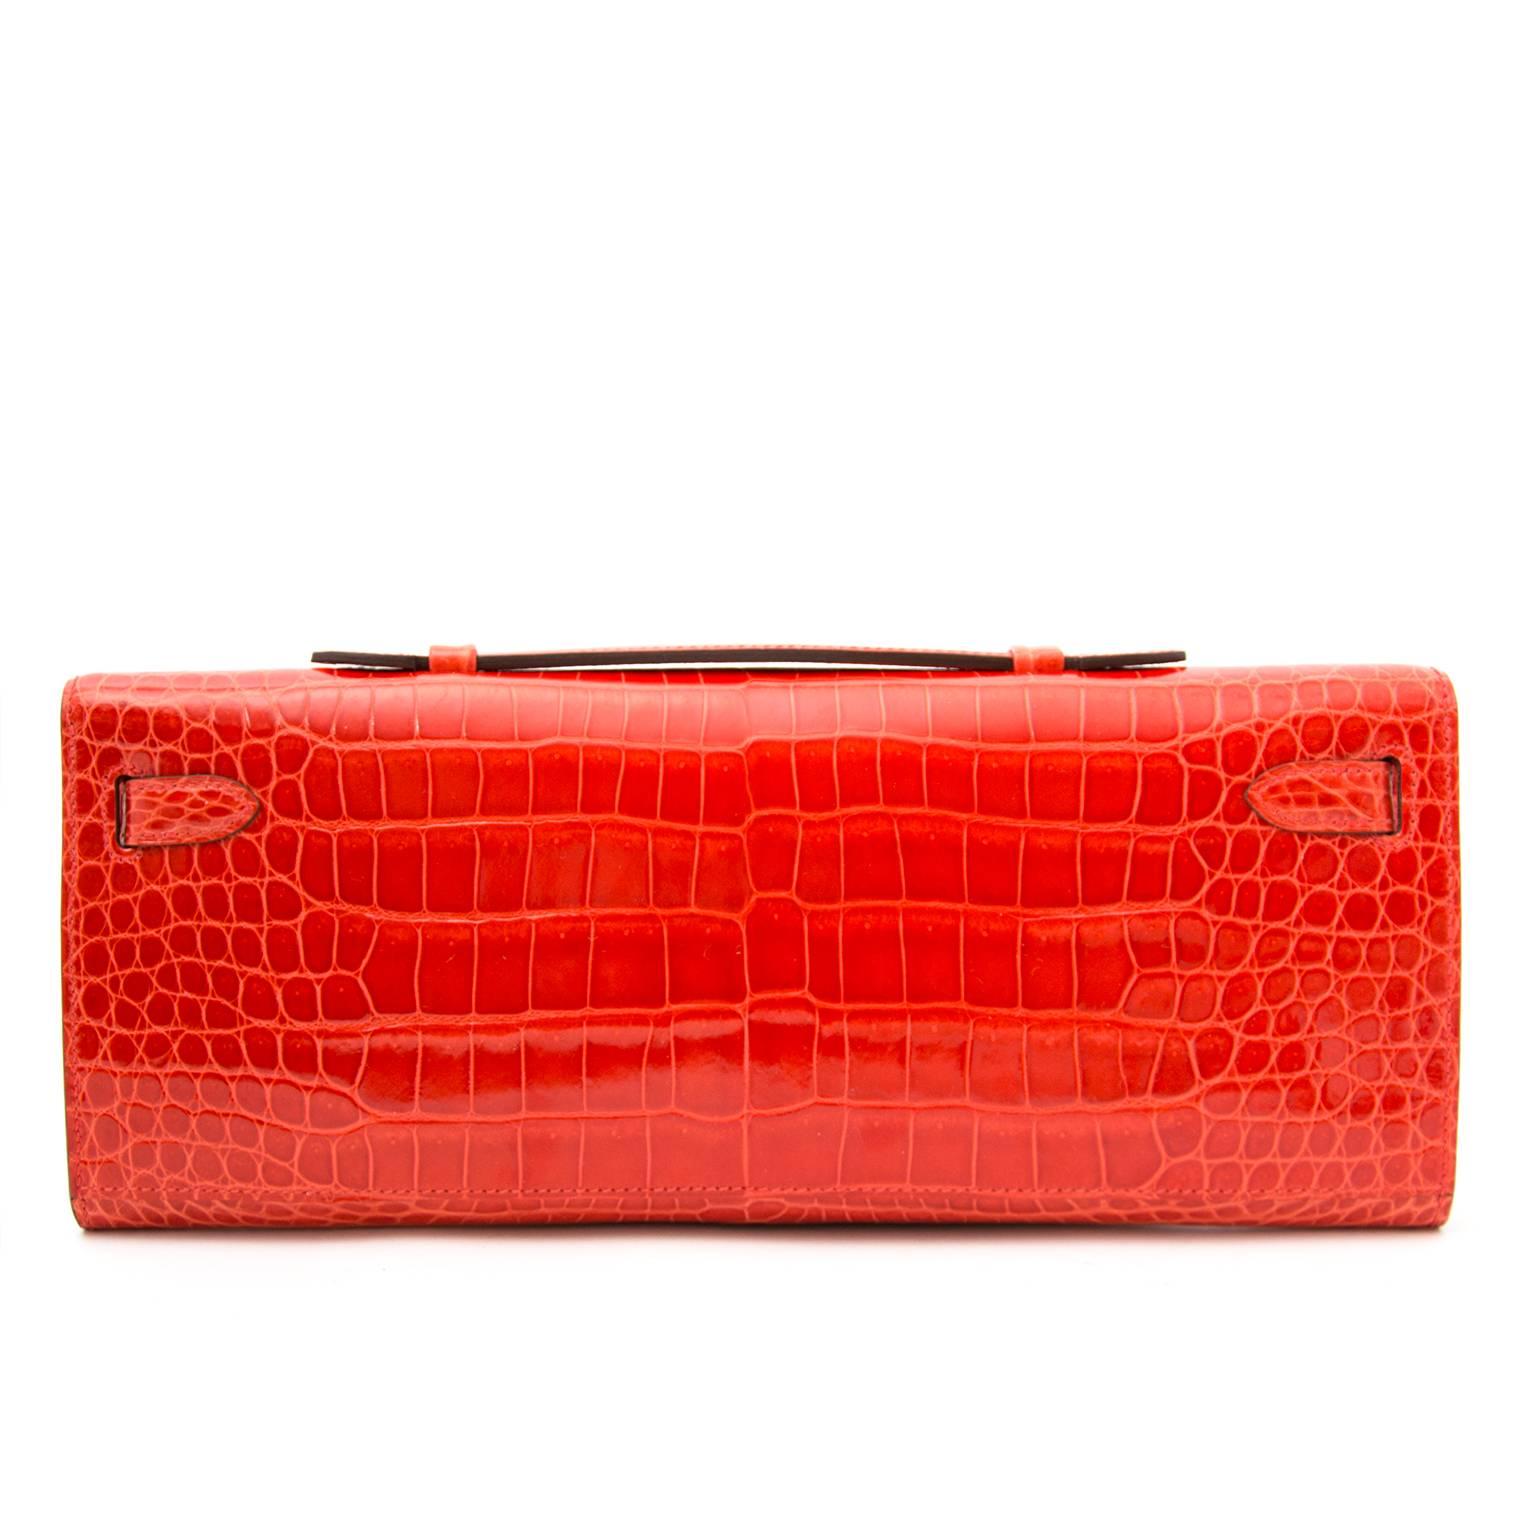 VERY RARE- HOW AMAZING this impossible find.
Pochette Kelly Cut Crocodile porosus lisse in the bright orange poppy.
We love the combination with the gold hardware.
The pochette is brand new and never used. Comes with full set, including original